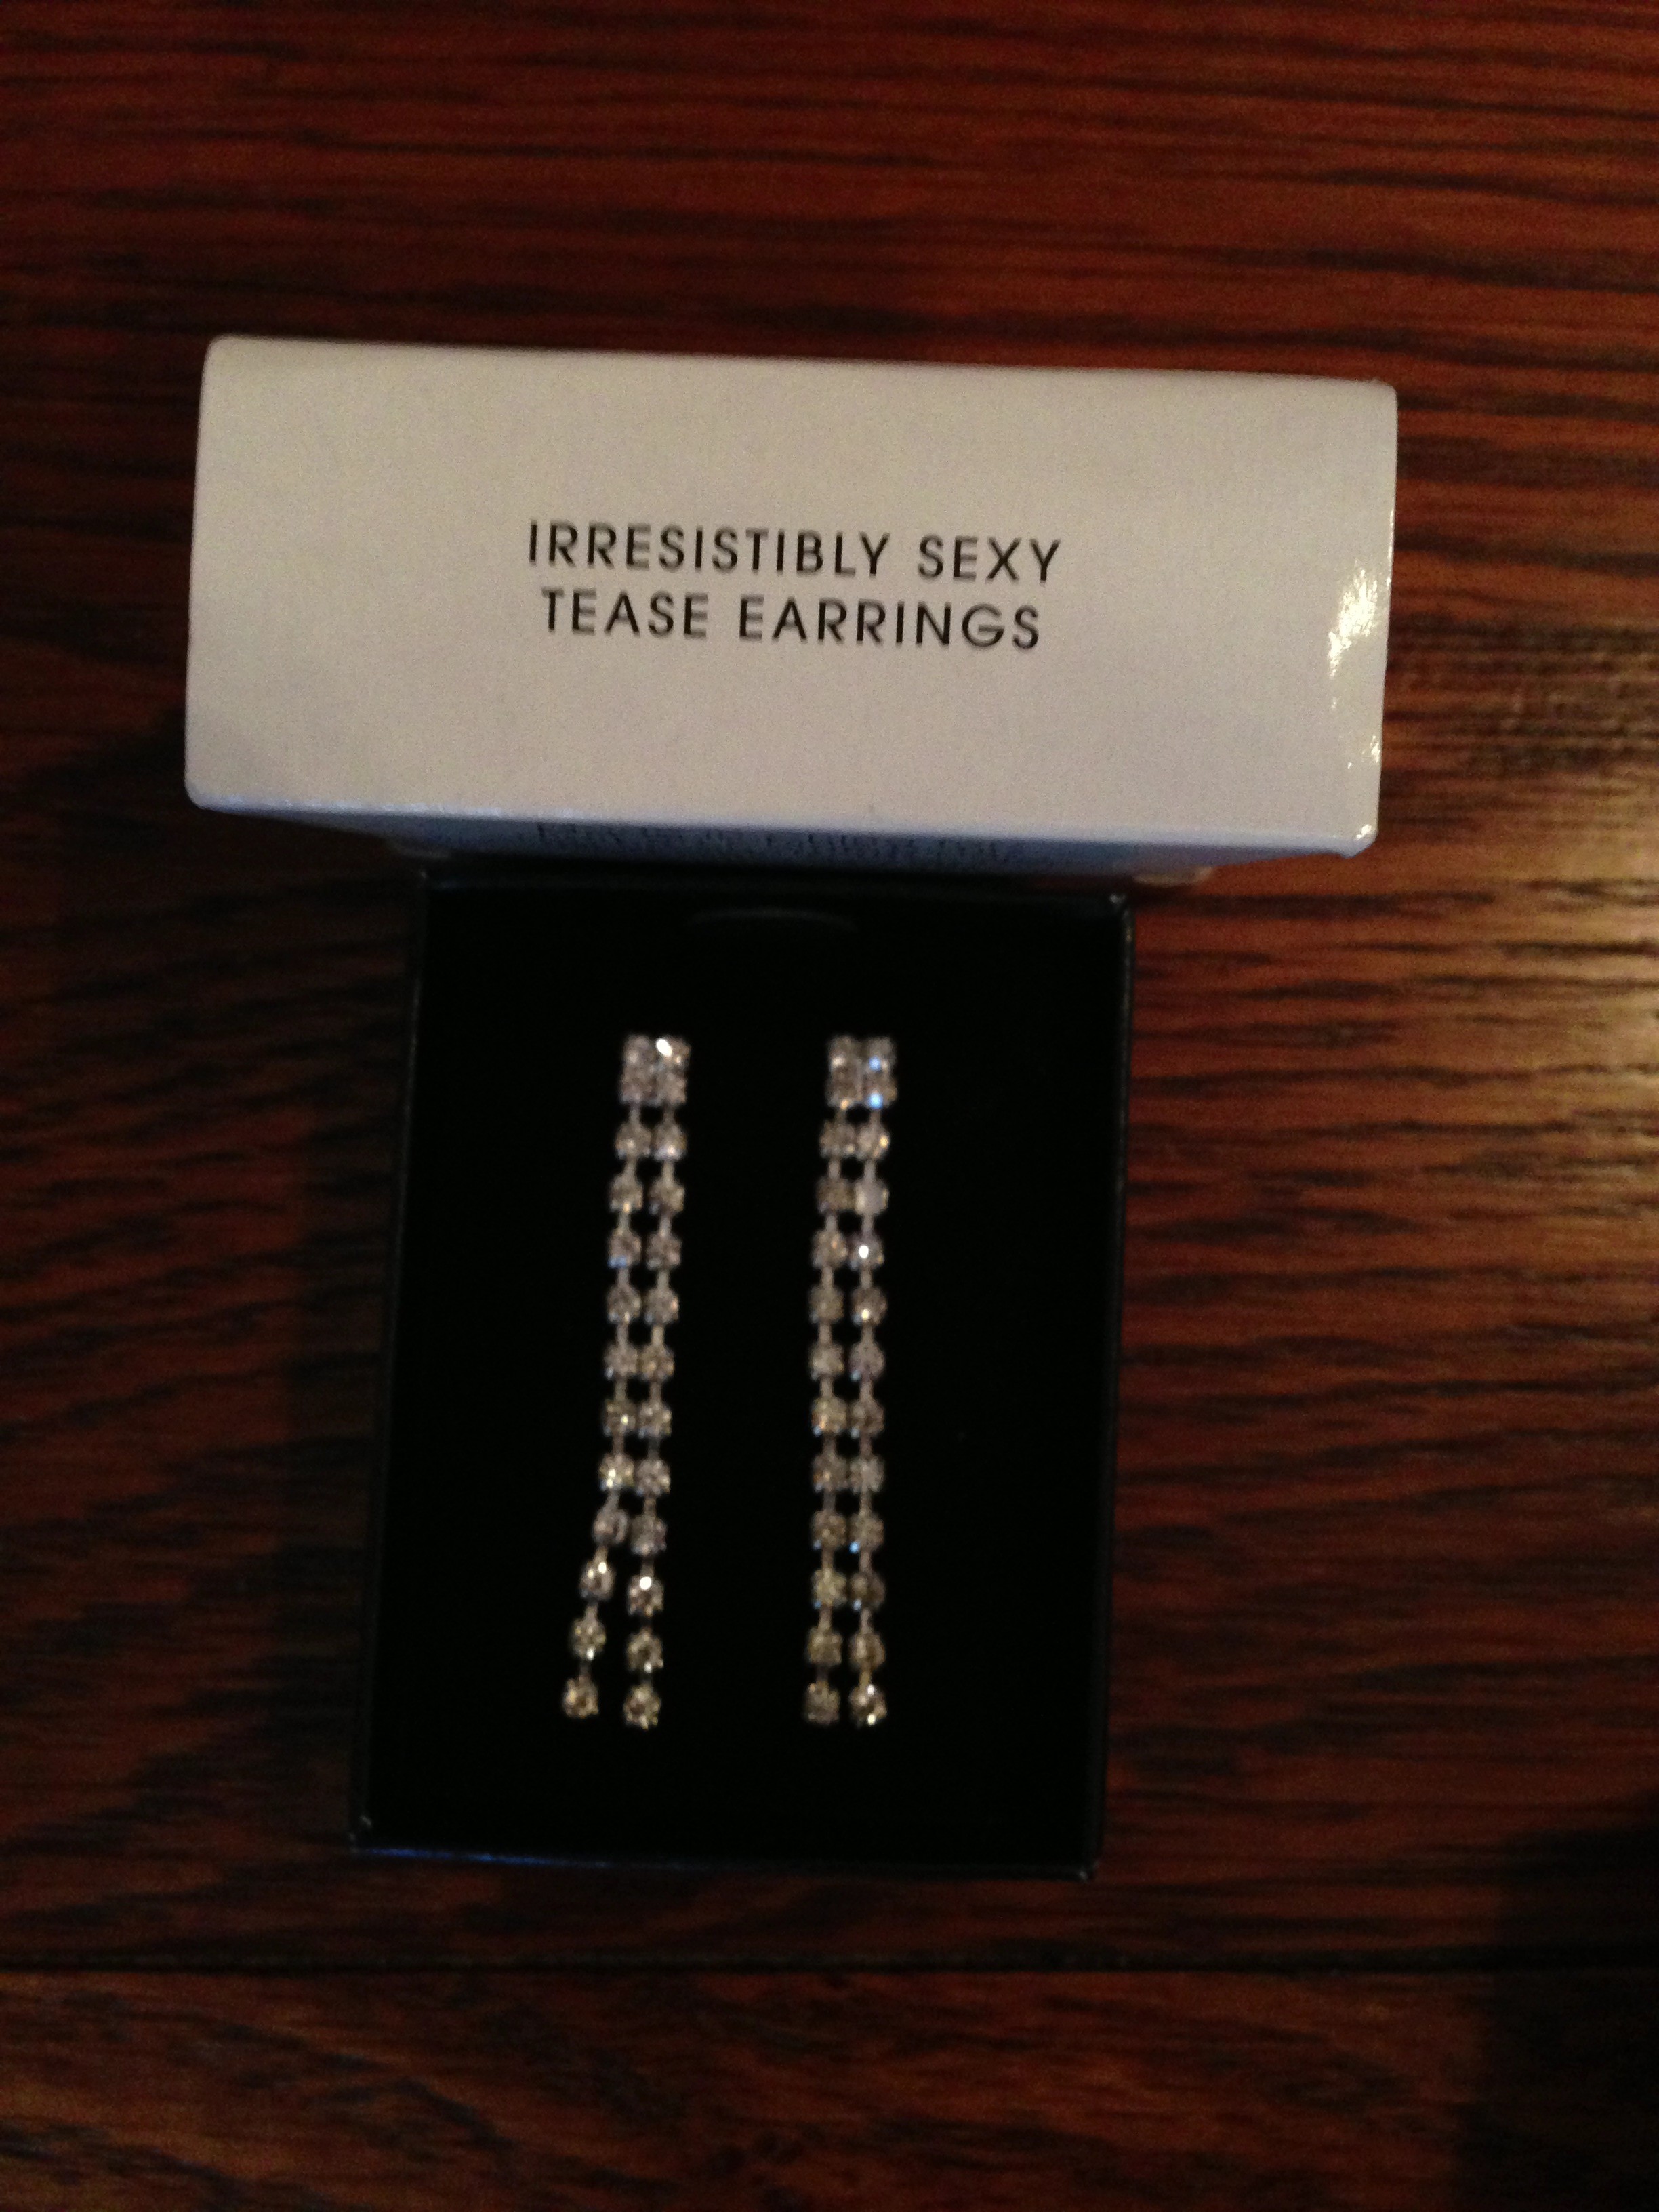 irresistibly sexy tease earrings